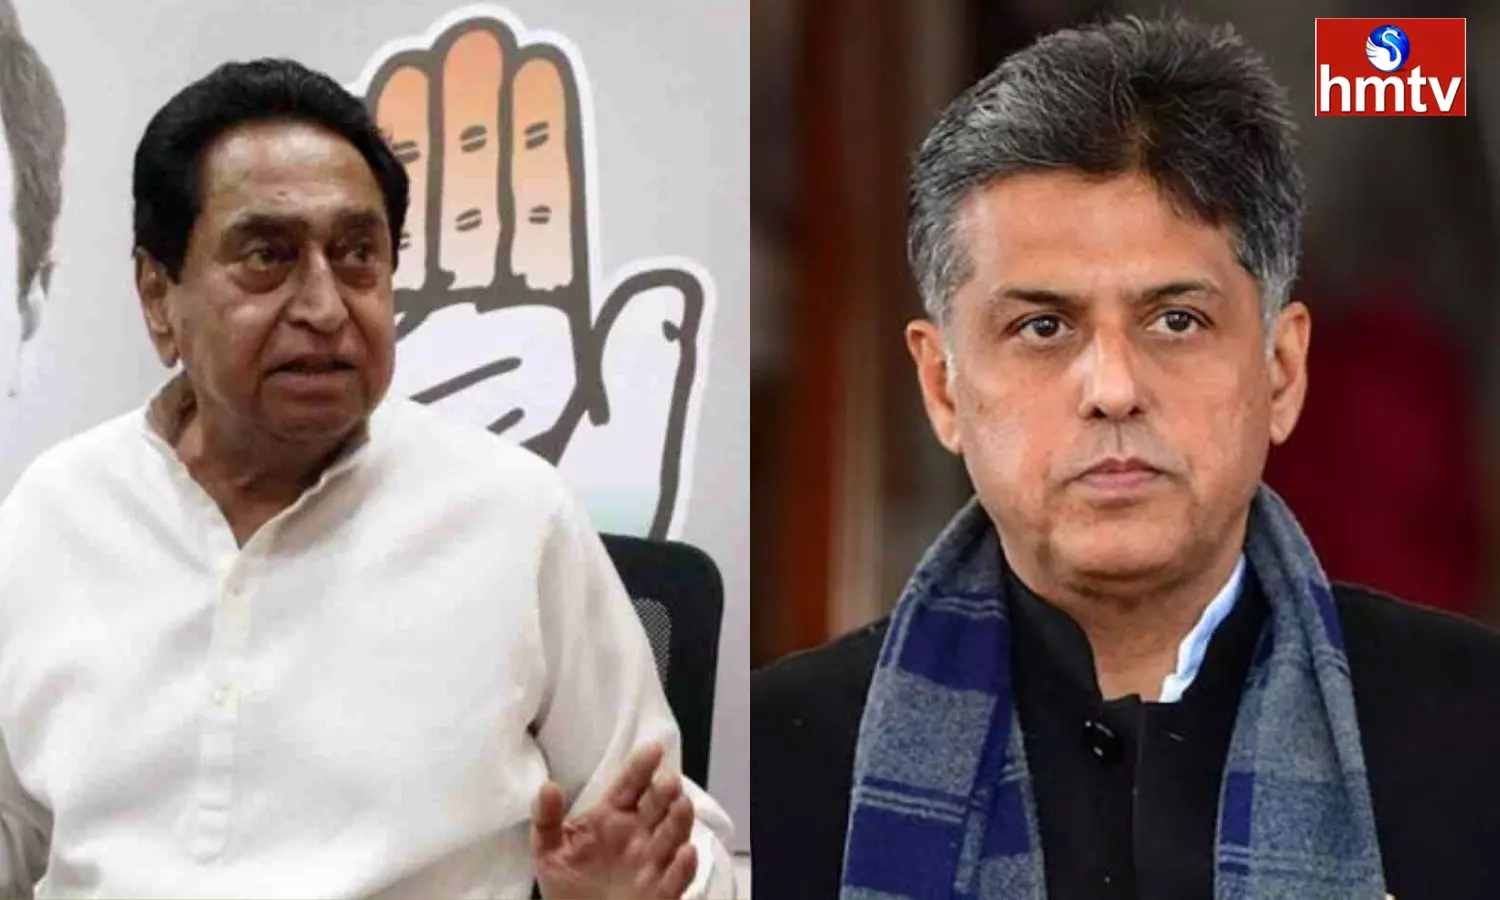 A Series Of Shocks For The Congress Party